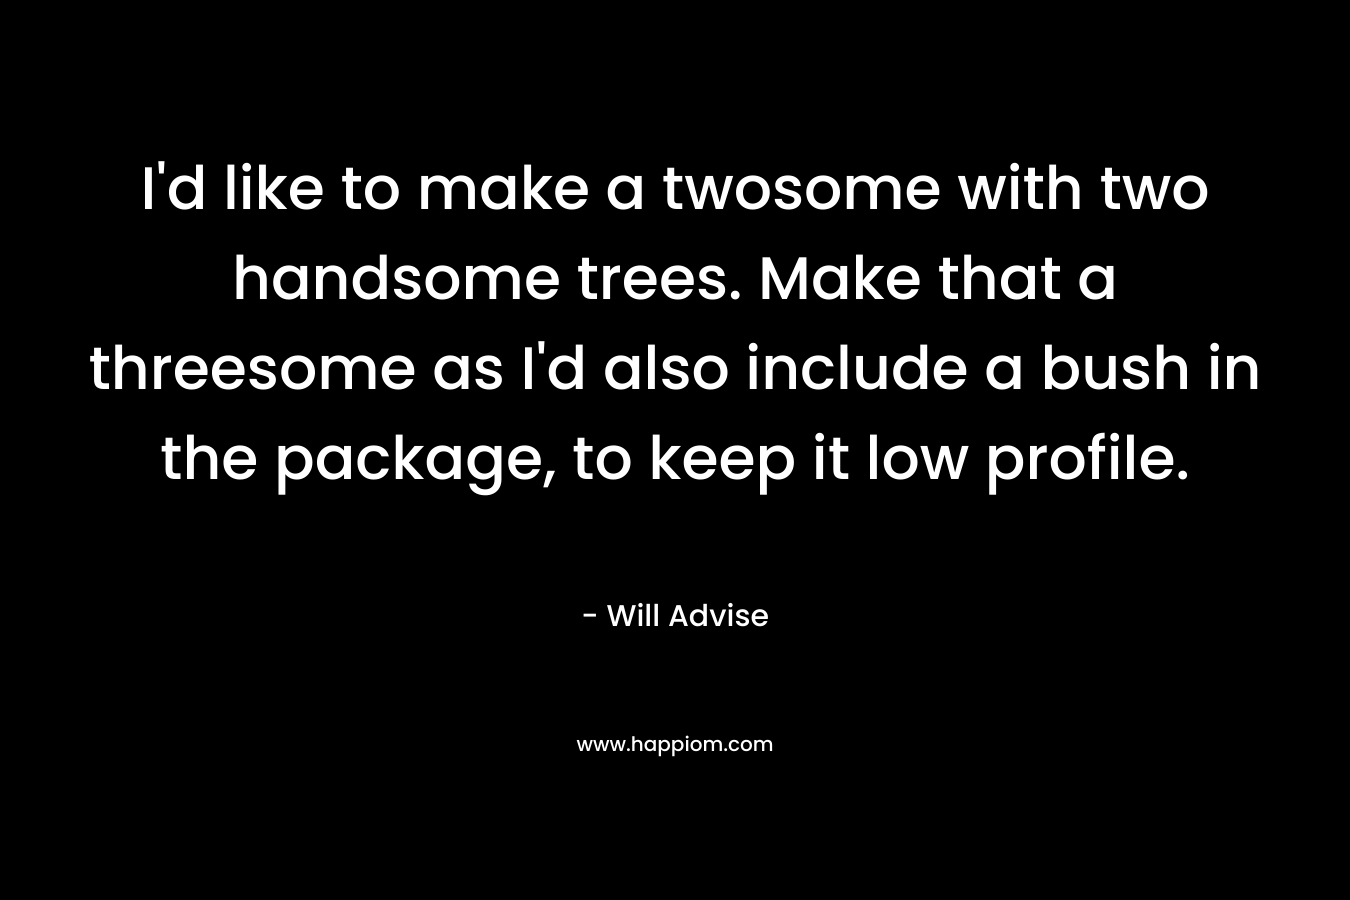 I’d like to make a twosome with two handsome trees. Make that a threesome as I’d also include a bush in the package, to keep it low profile. – Will Advise